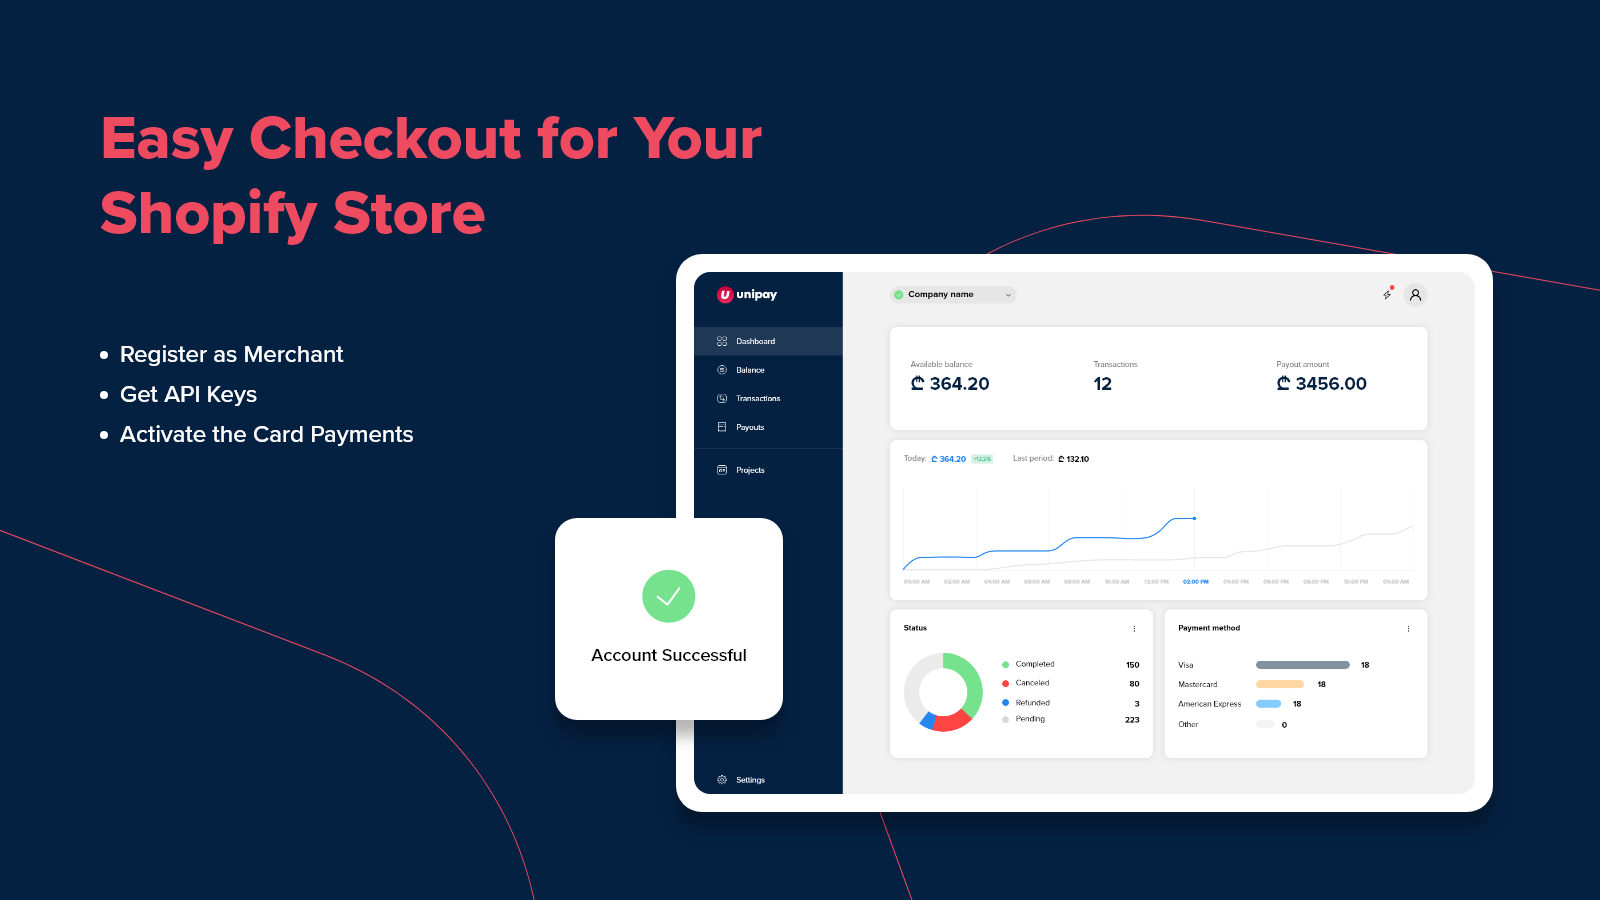 Easy Checkout for Your Shopify Store